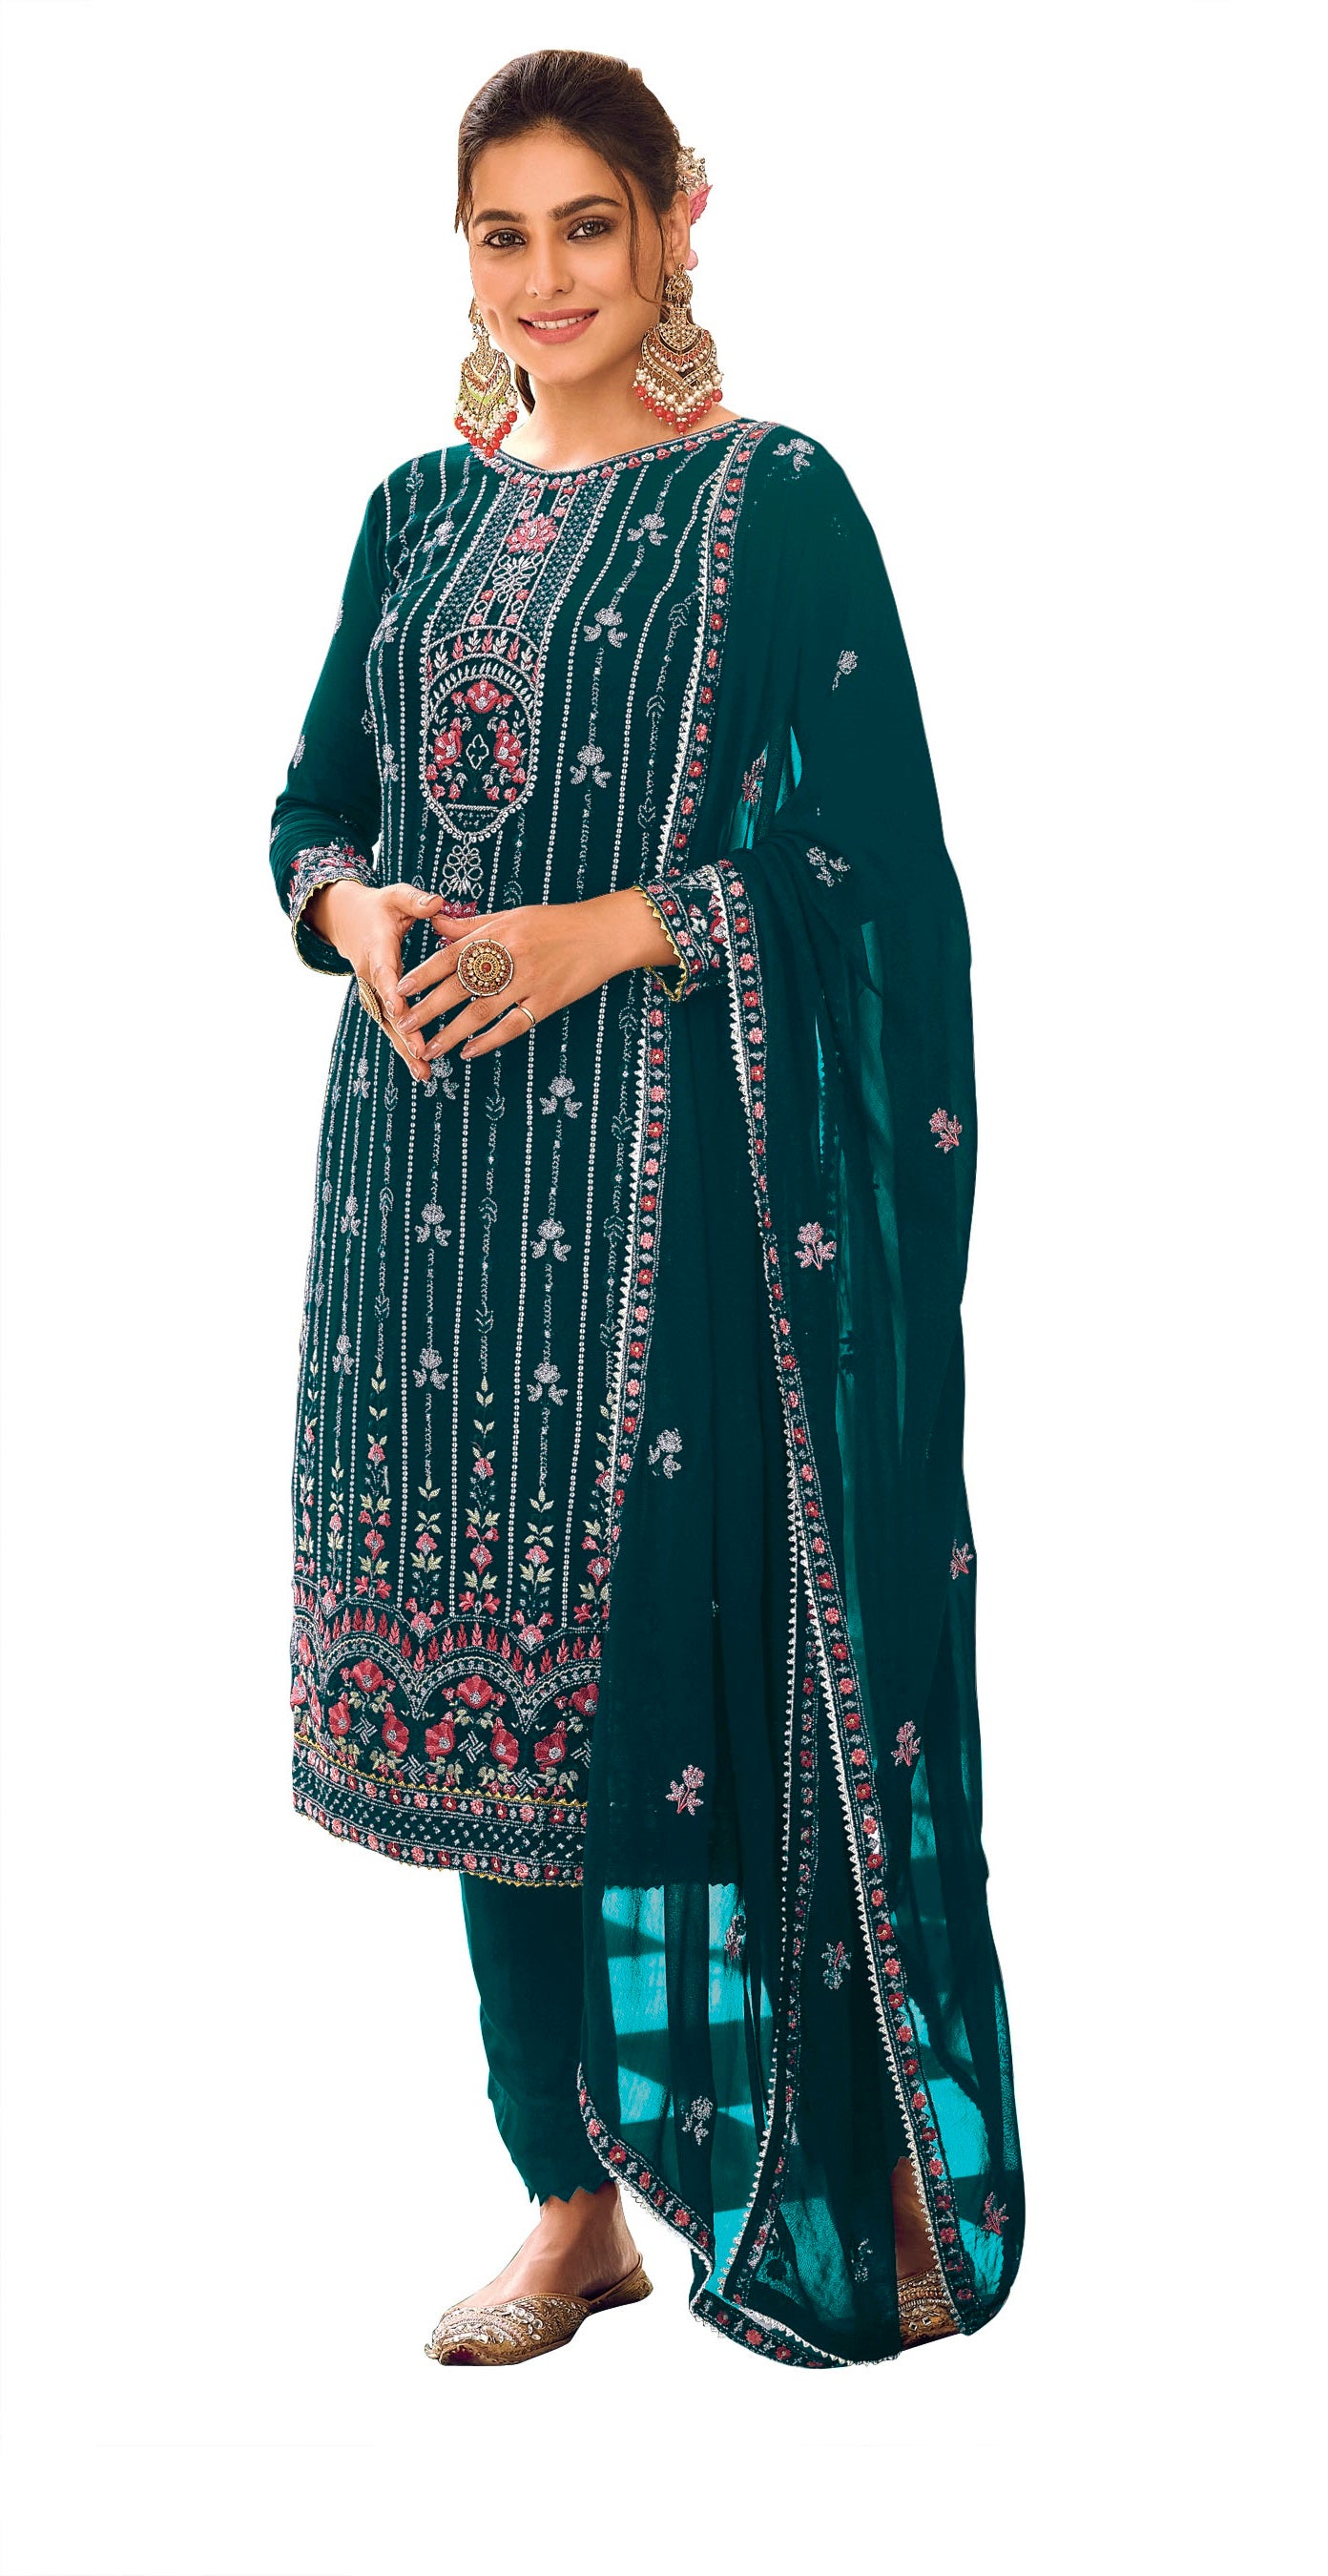 Sea Blue Color Faux Georgette With Embroidery Work Salwar Suit